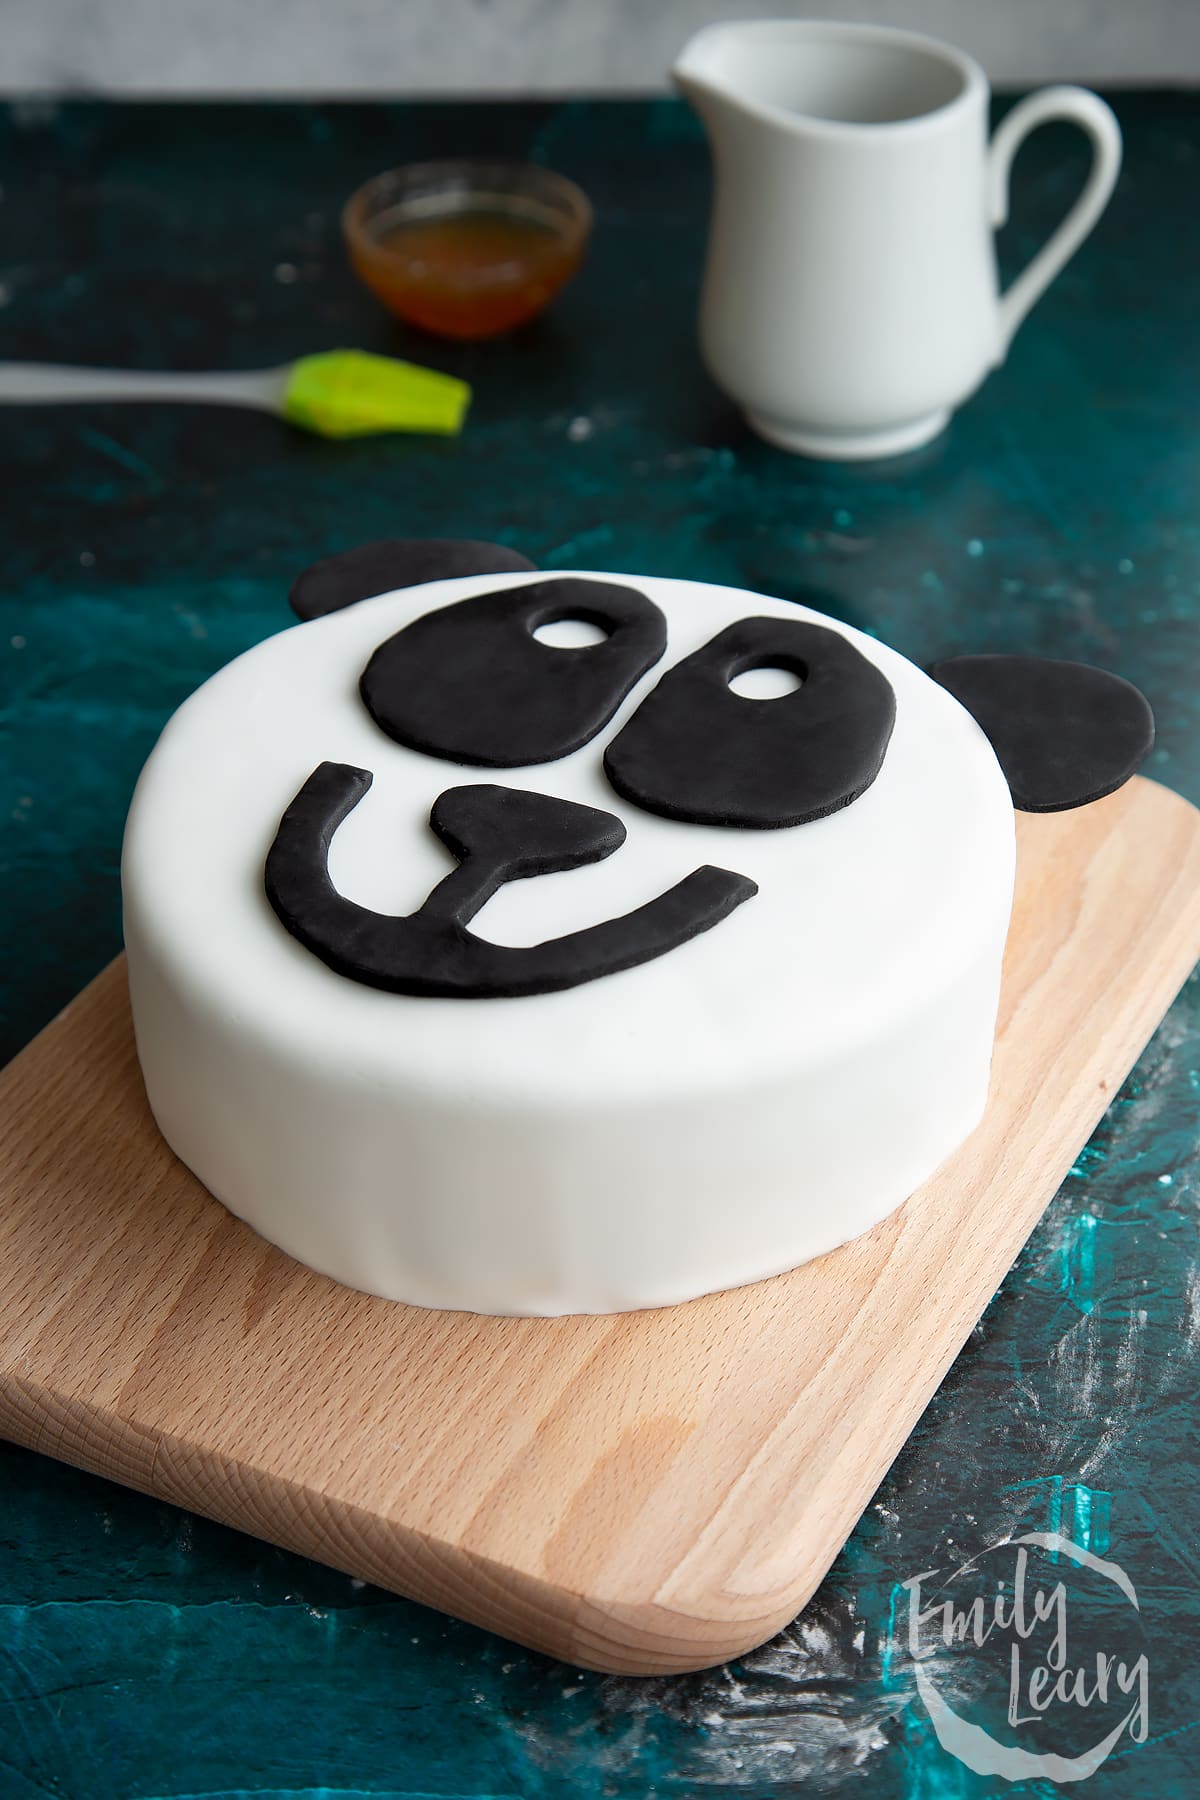 a cute animated panda face made of icing on a cake on w wooden baord.